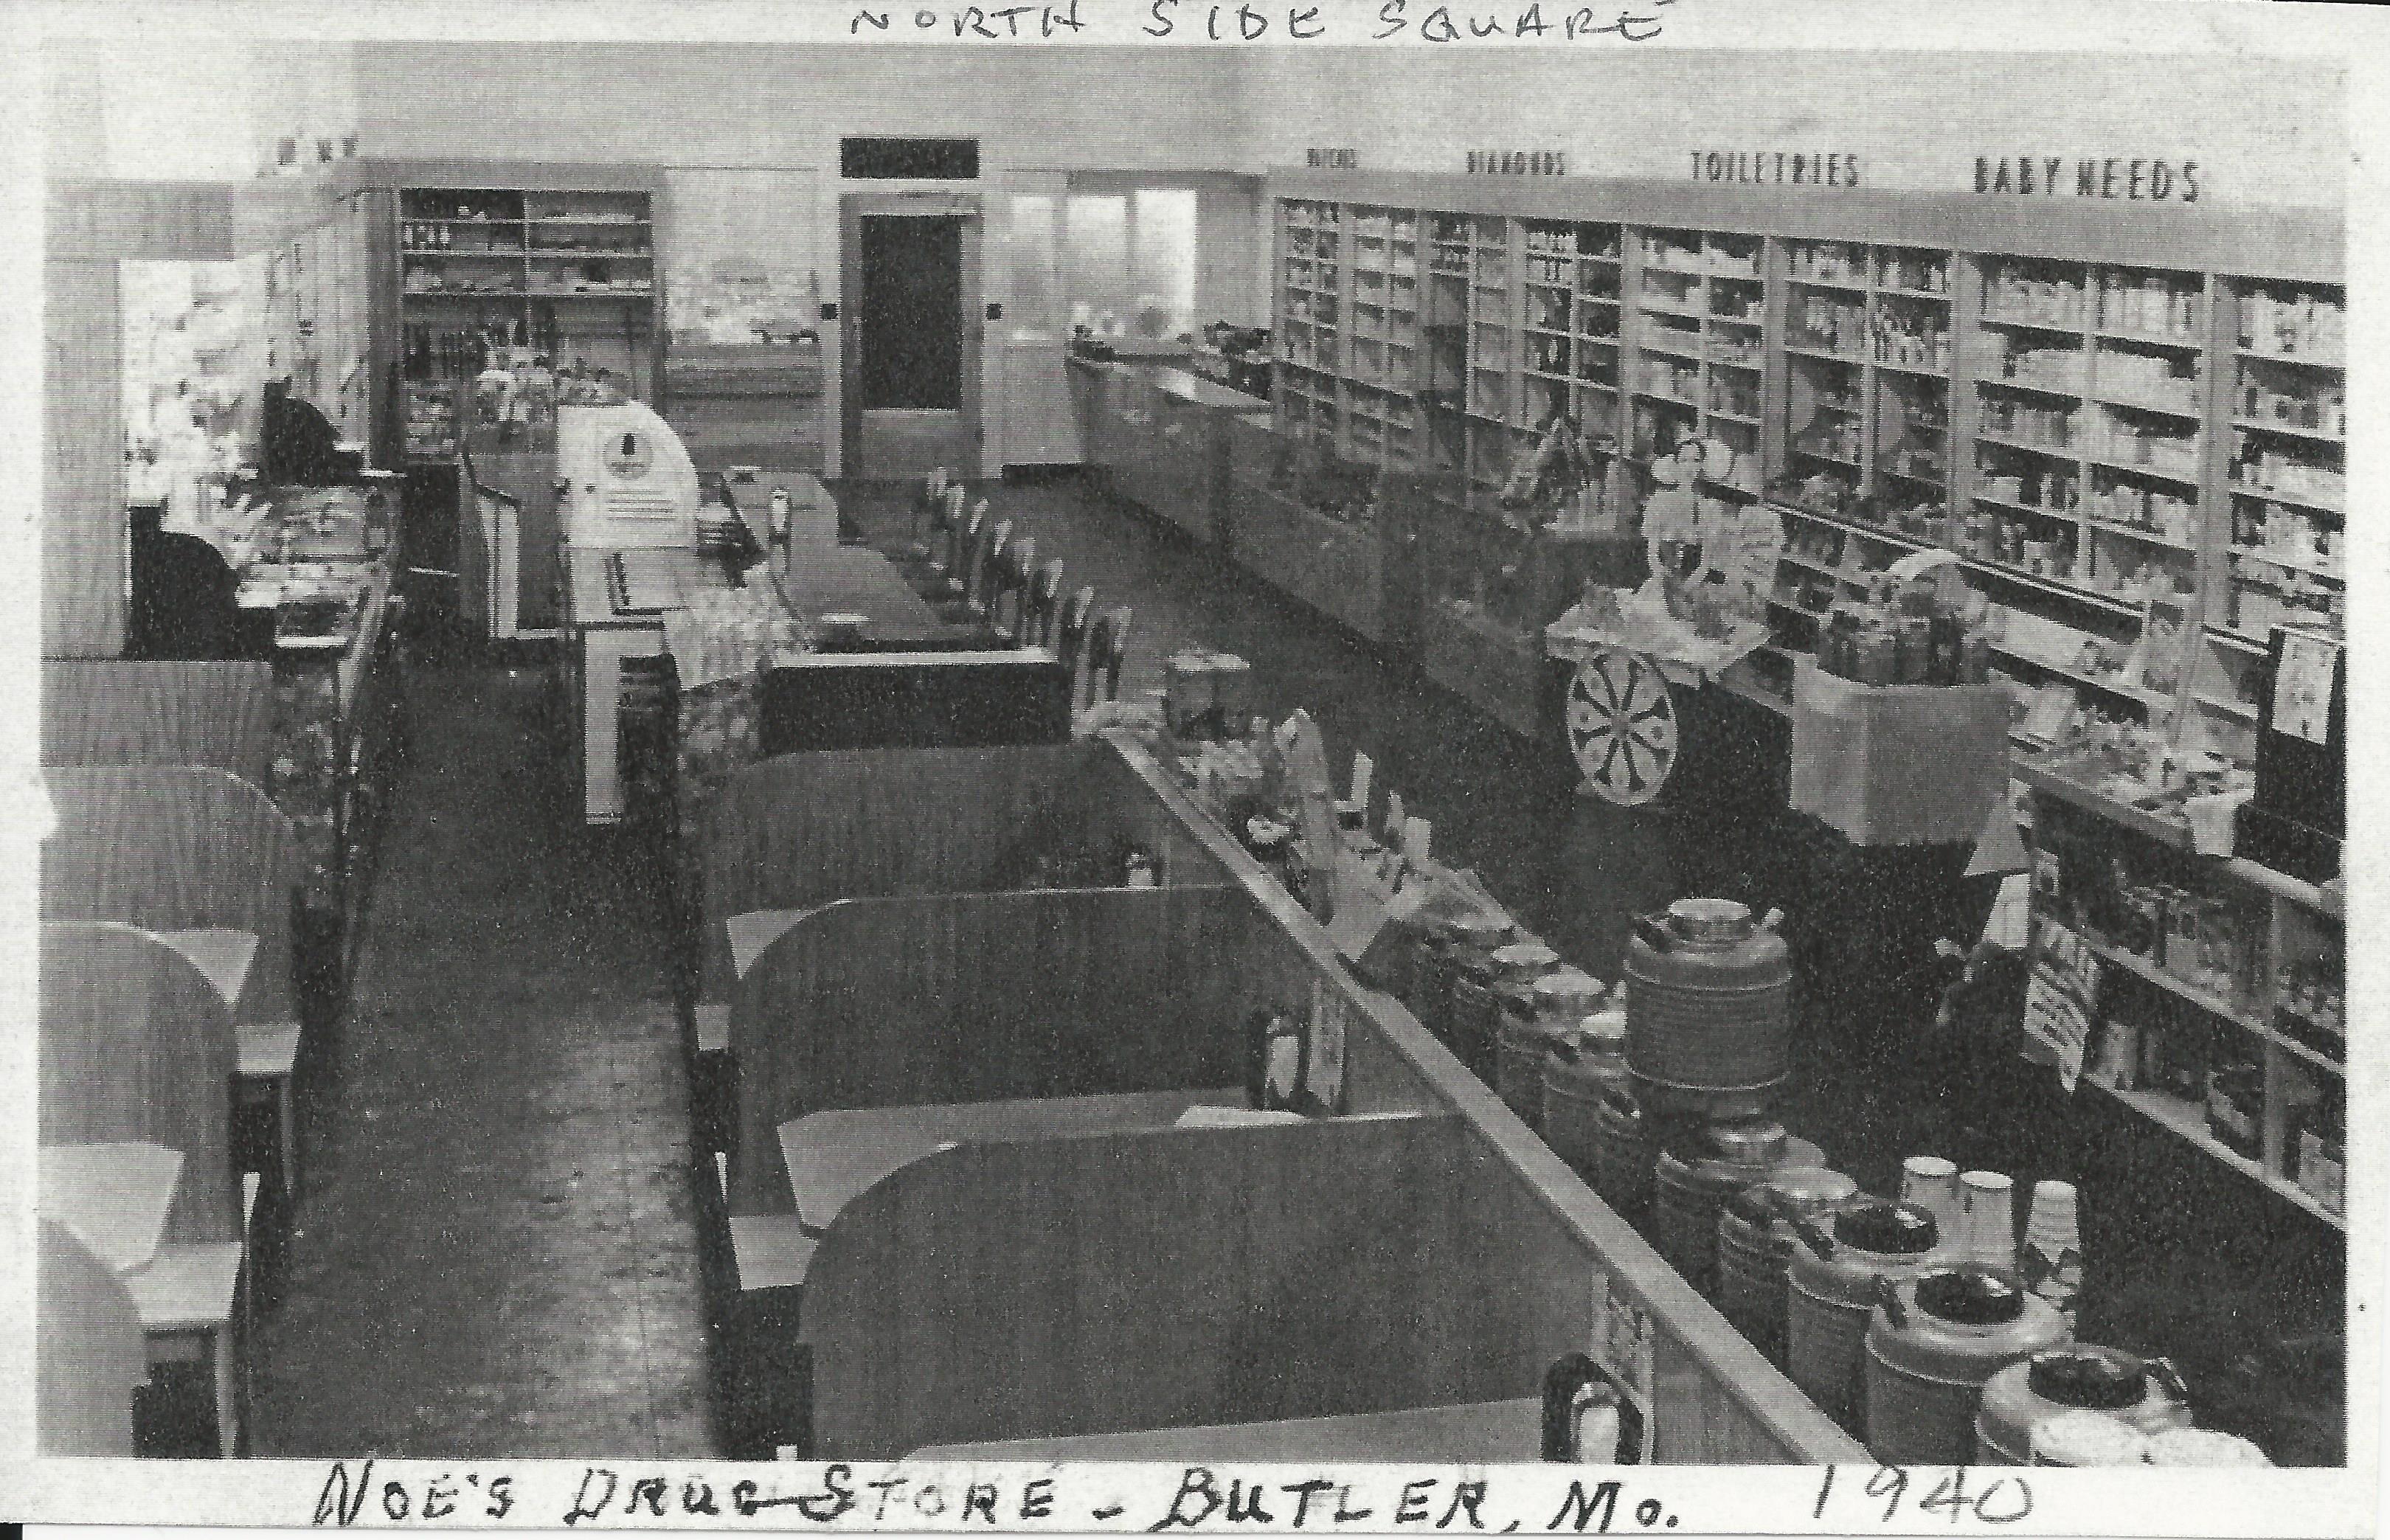 Interior Shot of Noeâ€™s Drug Store before the fire.